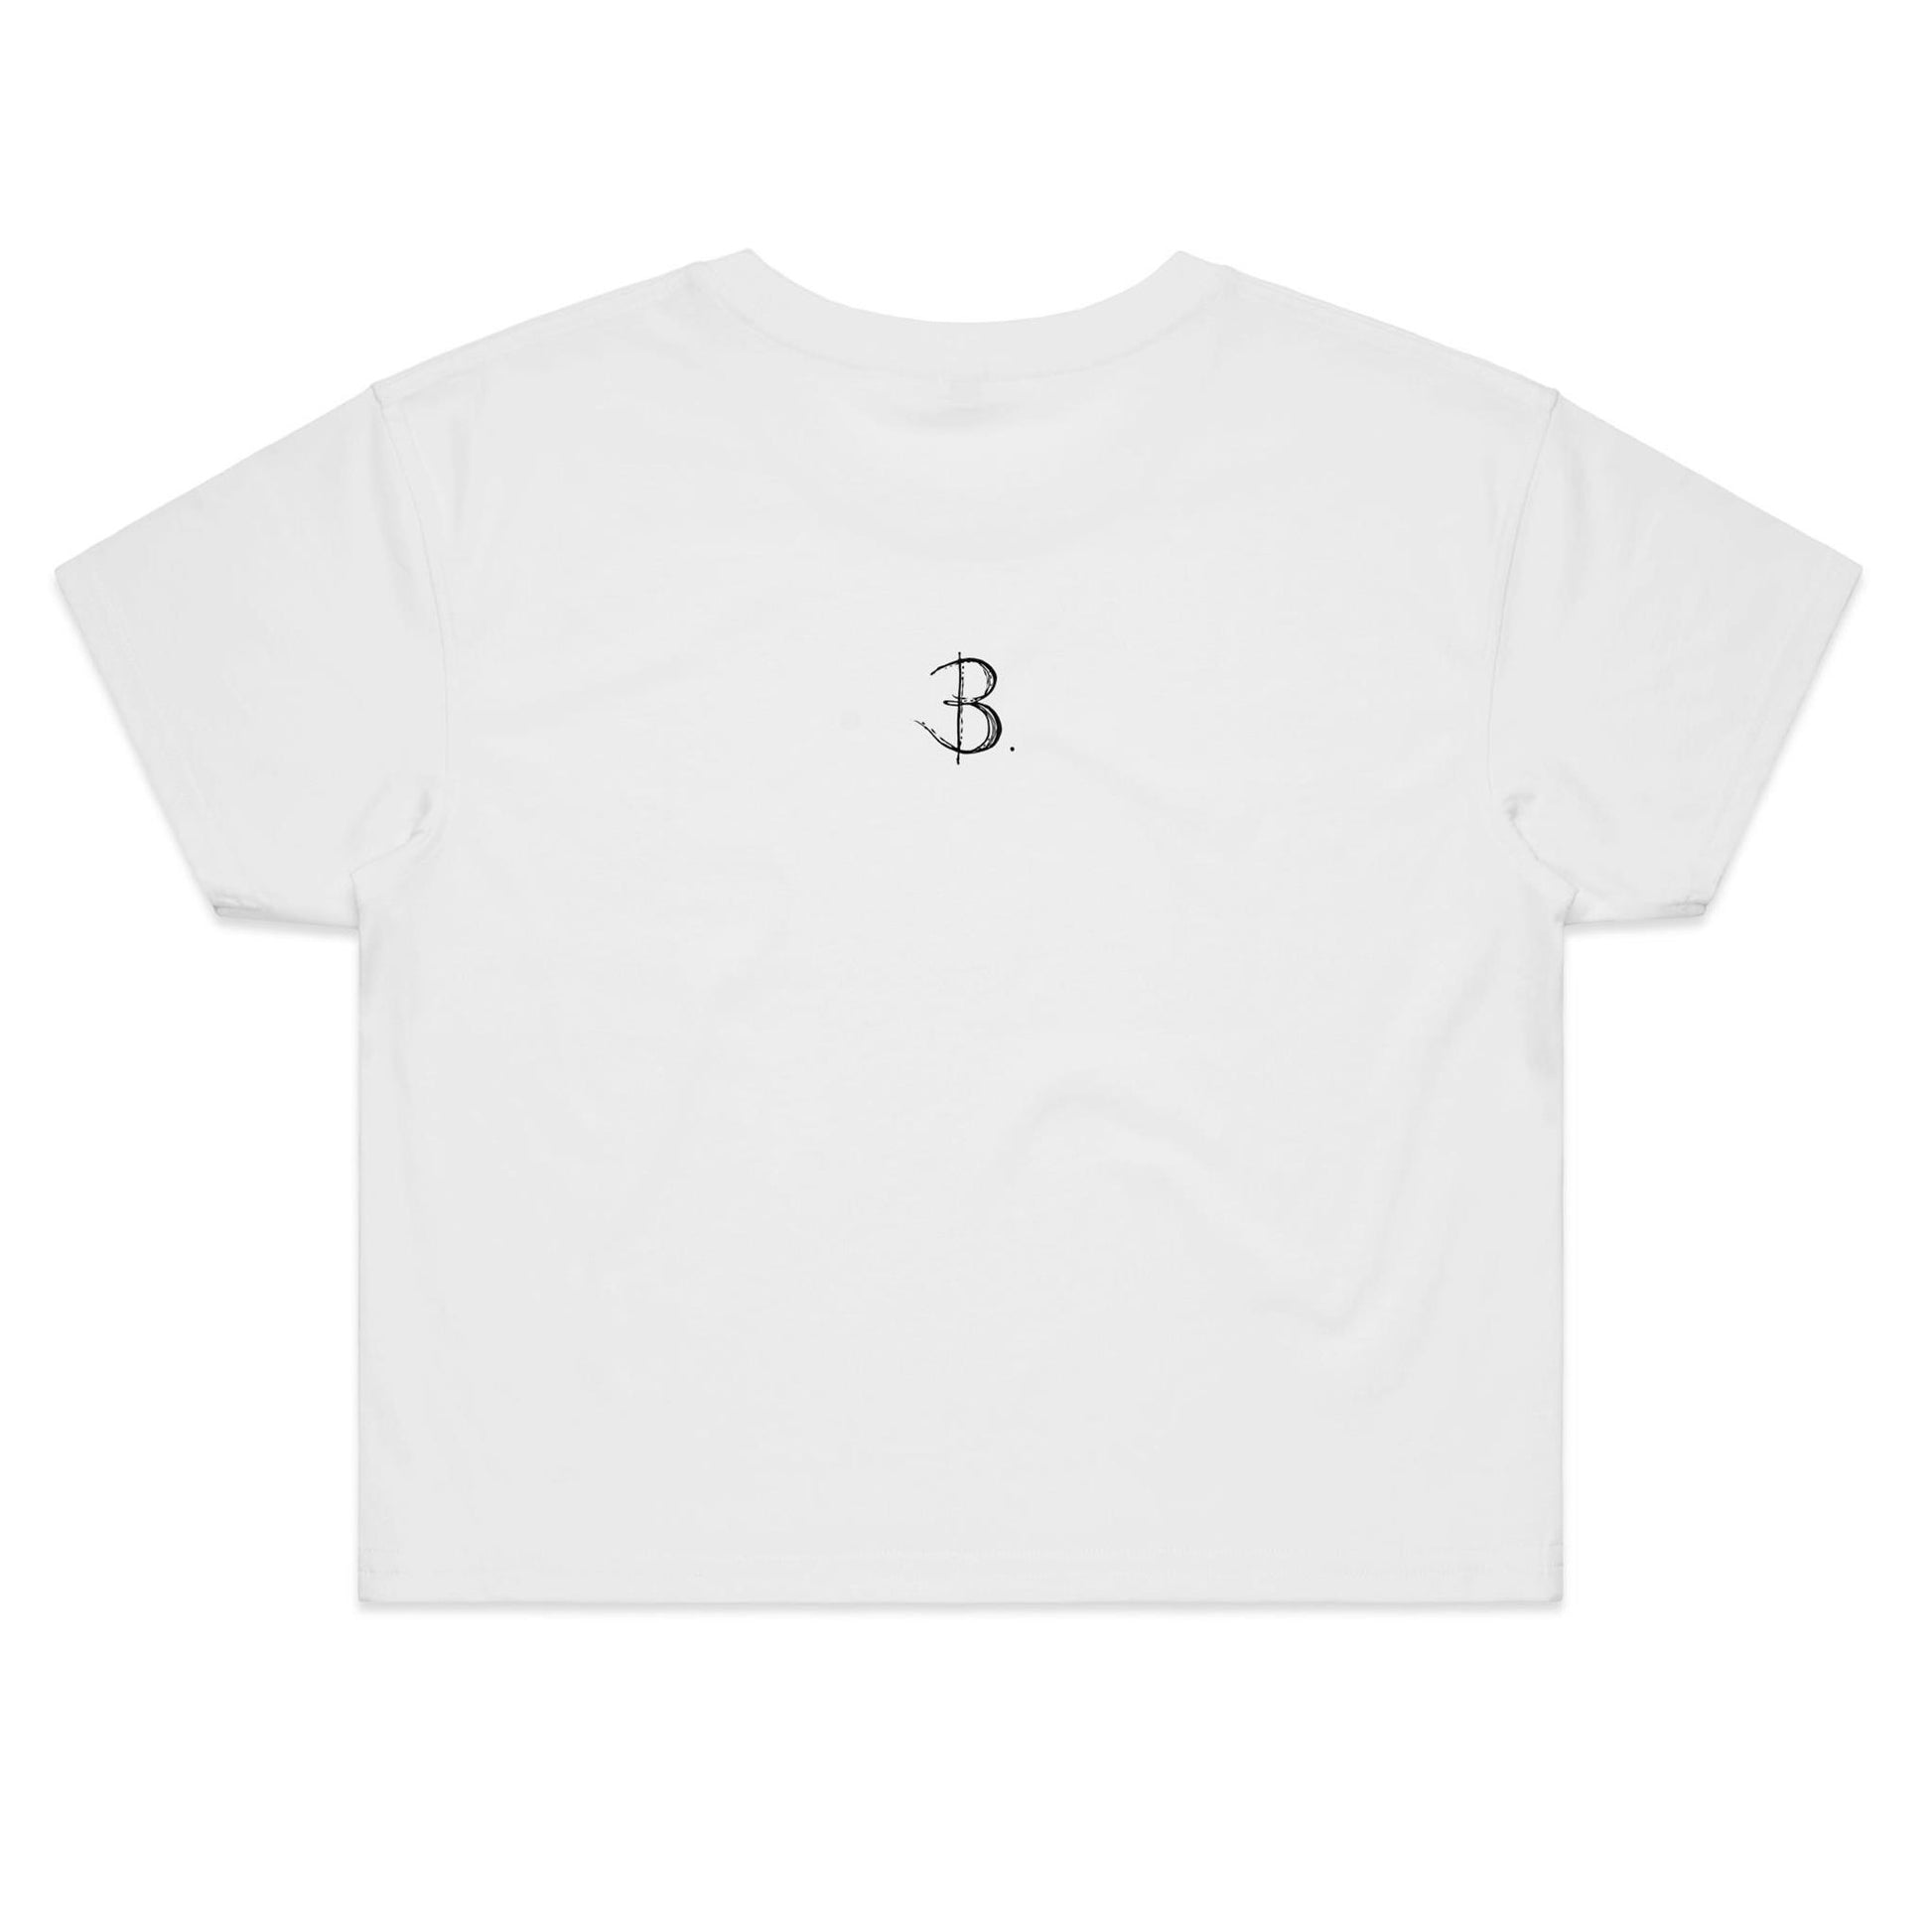 'Swatch Crop Top Tee Silver' Back with Minimla Black Logo designed by Bridget Bradley. Exclusive tees, produced from sustainable cotton. B. Streetwear, Ships from Australia